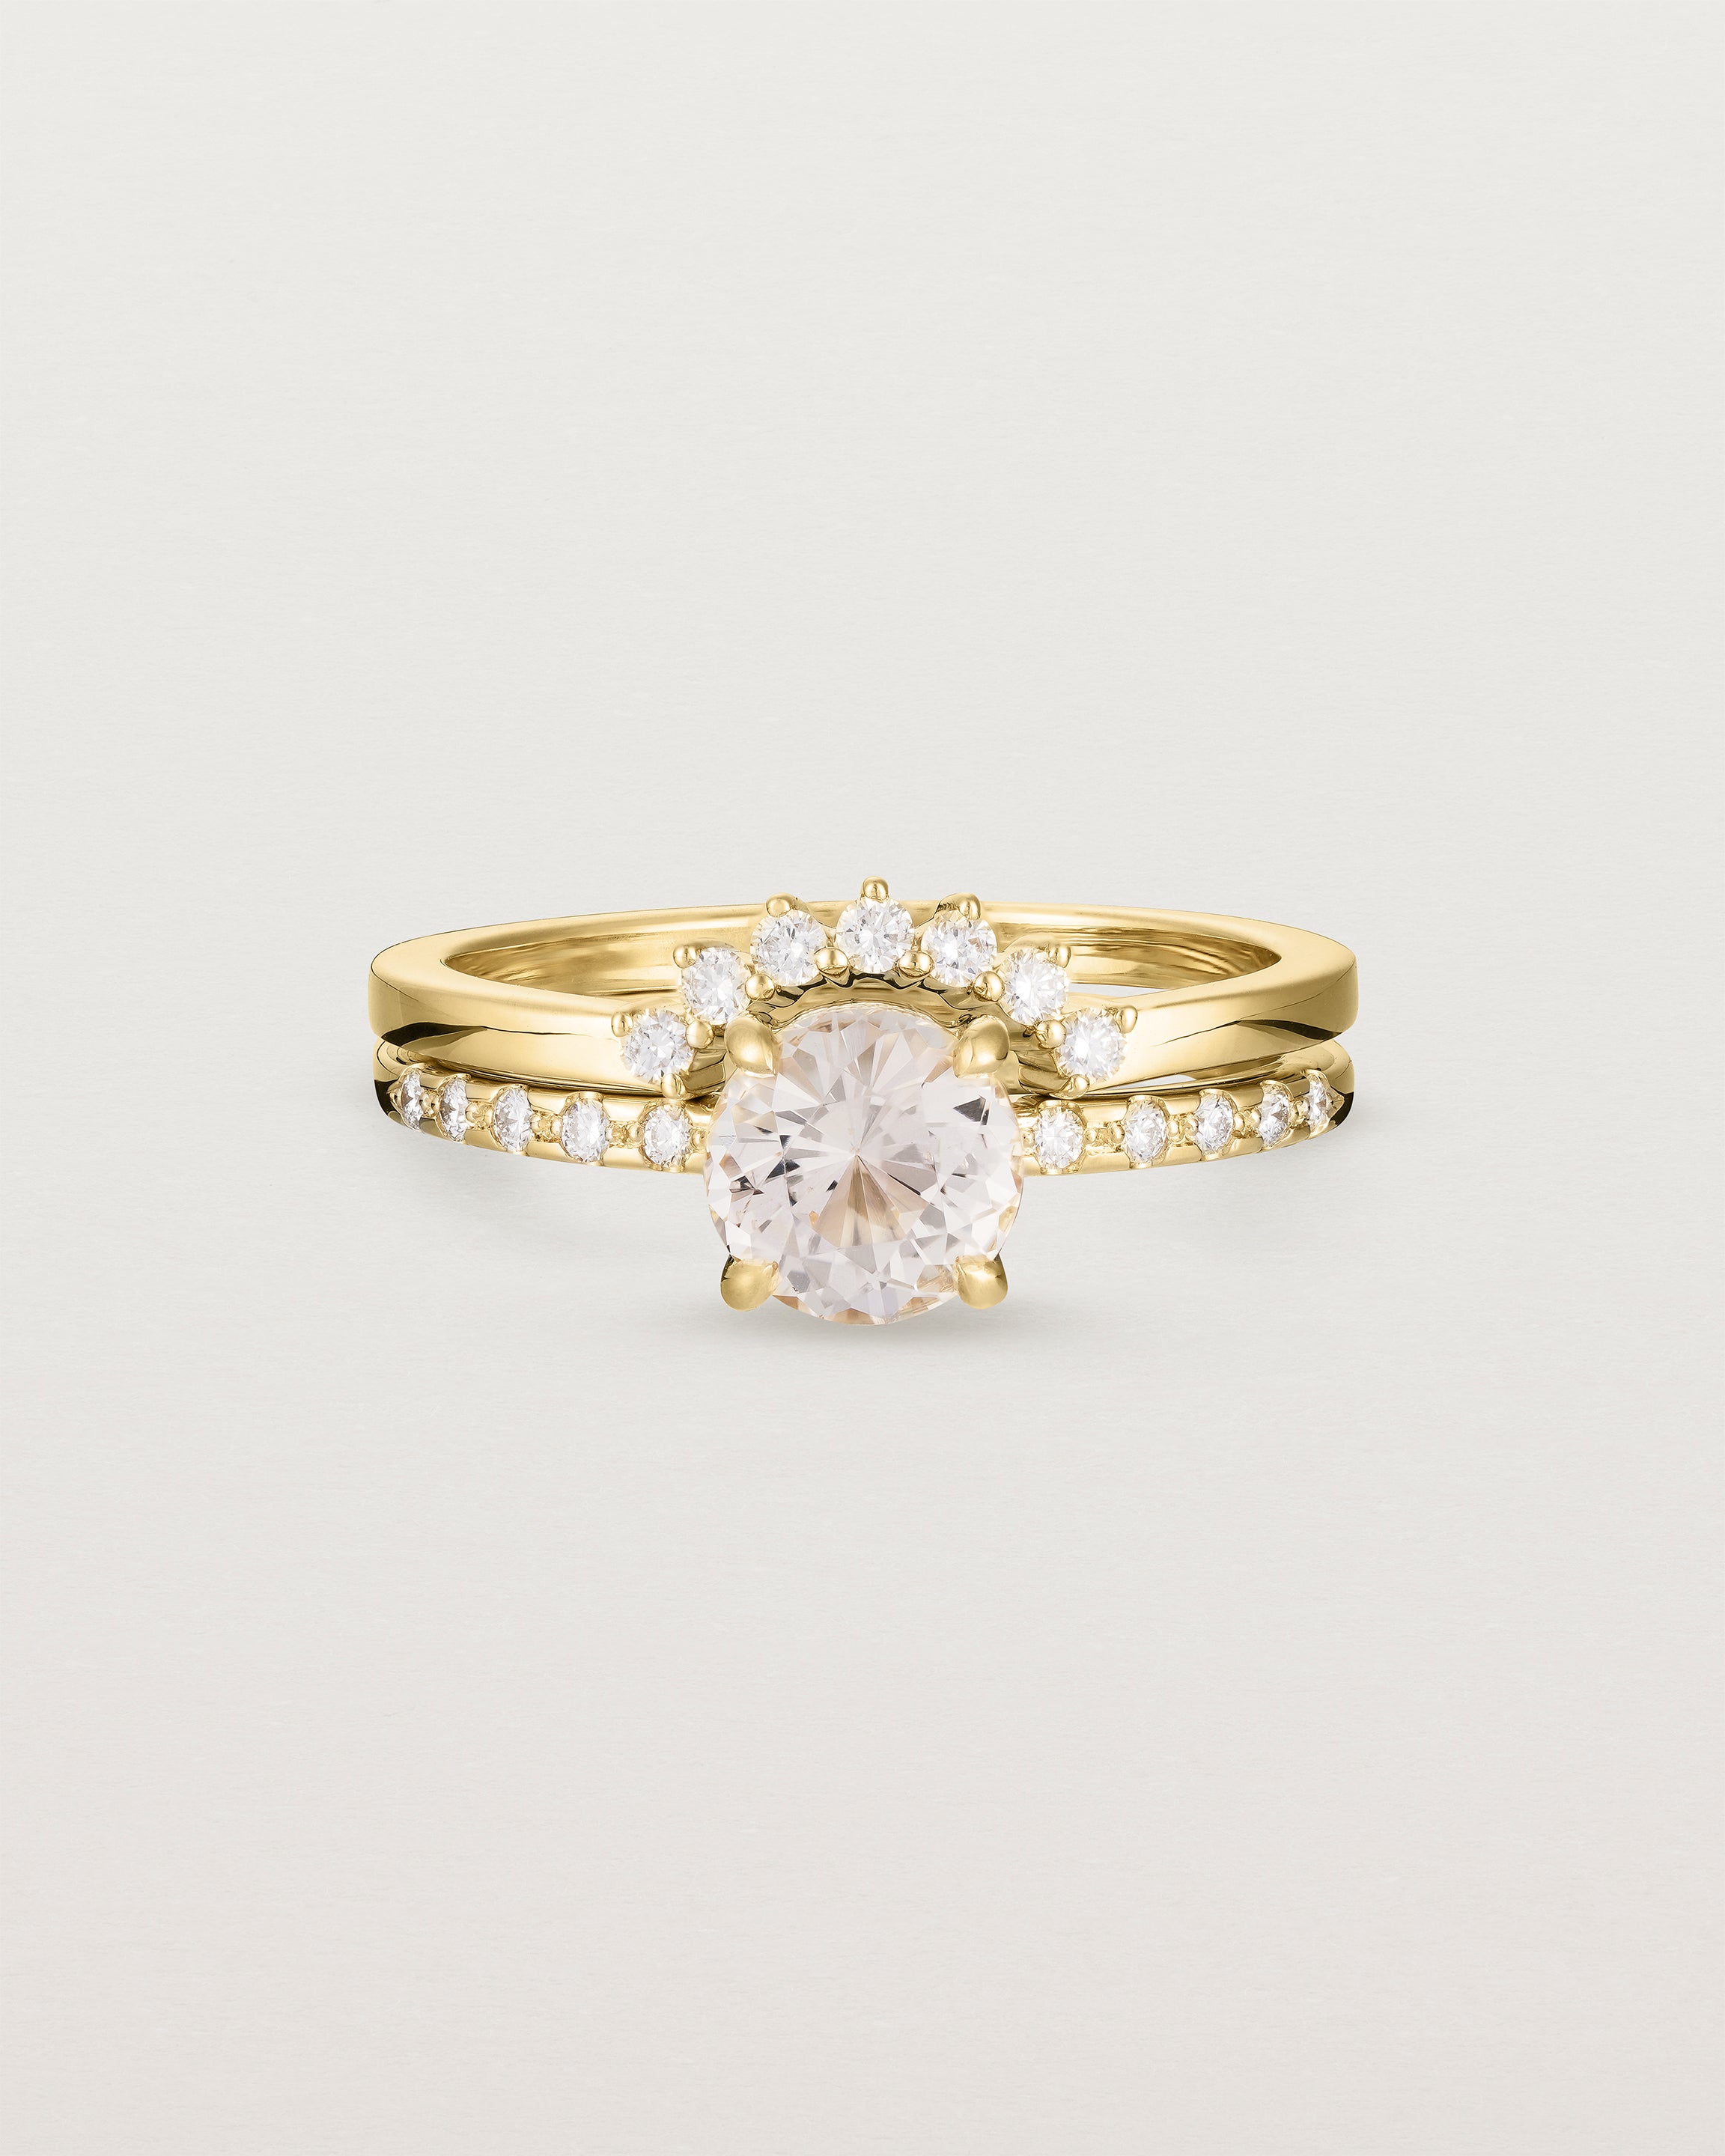 The Petite Una Round Solitaire | Morganite with Cascade Shoulders, stacked with the Reina Crown Ring | Diamonds in Yellow Gold.